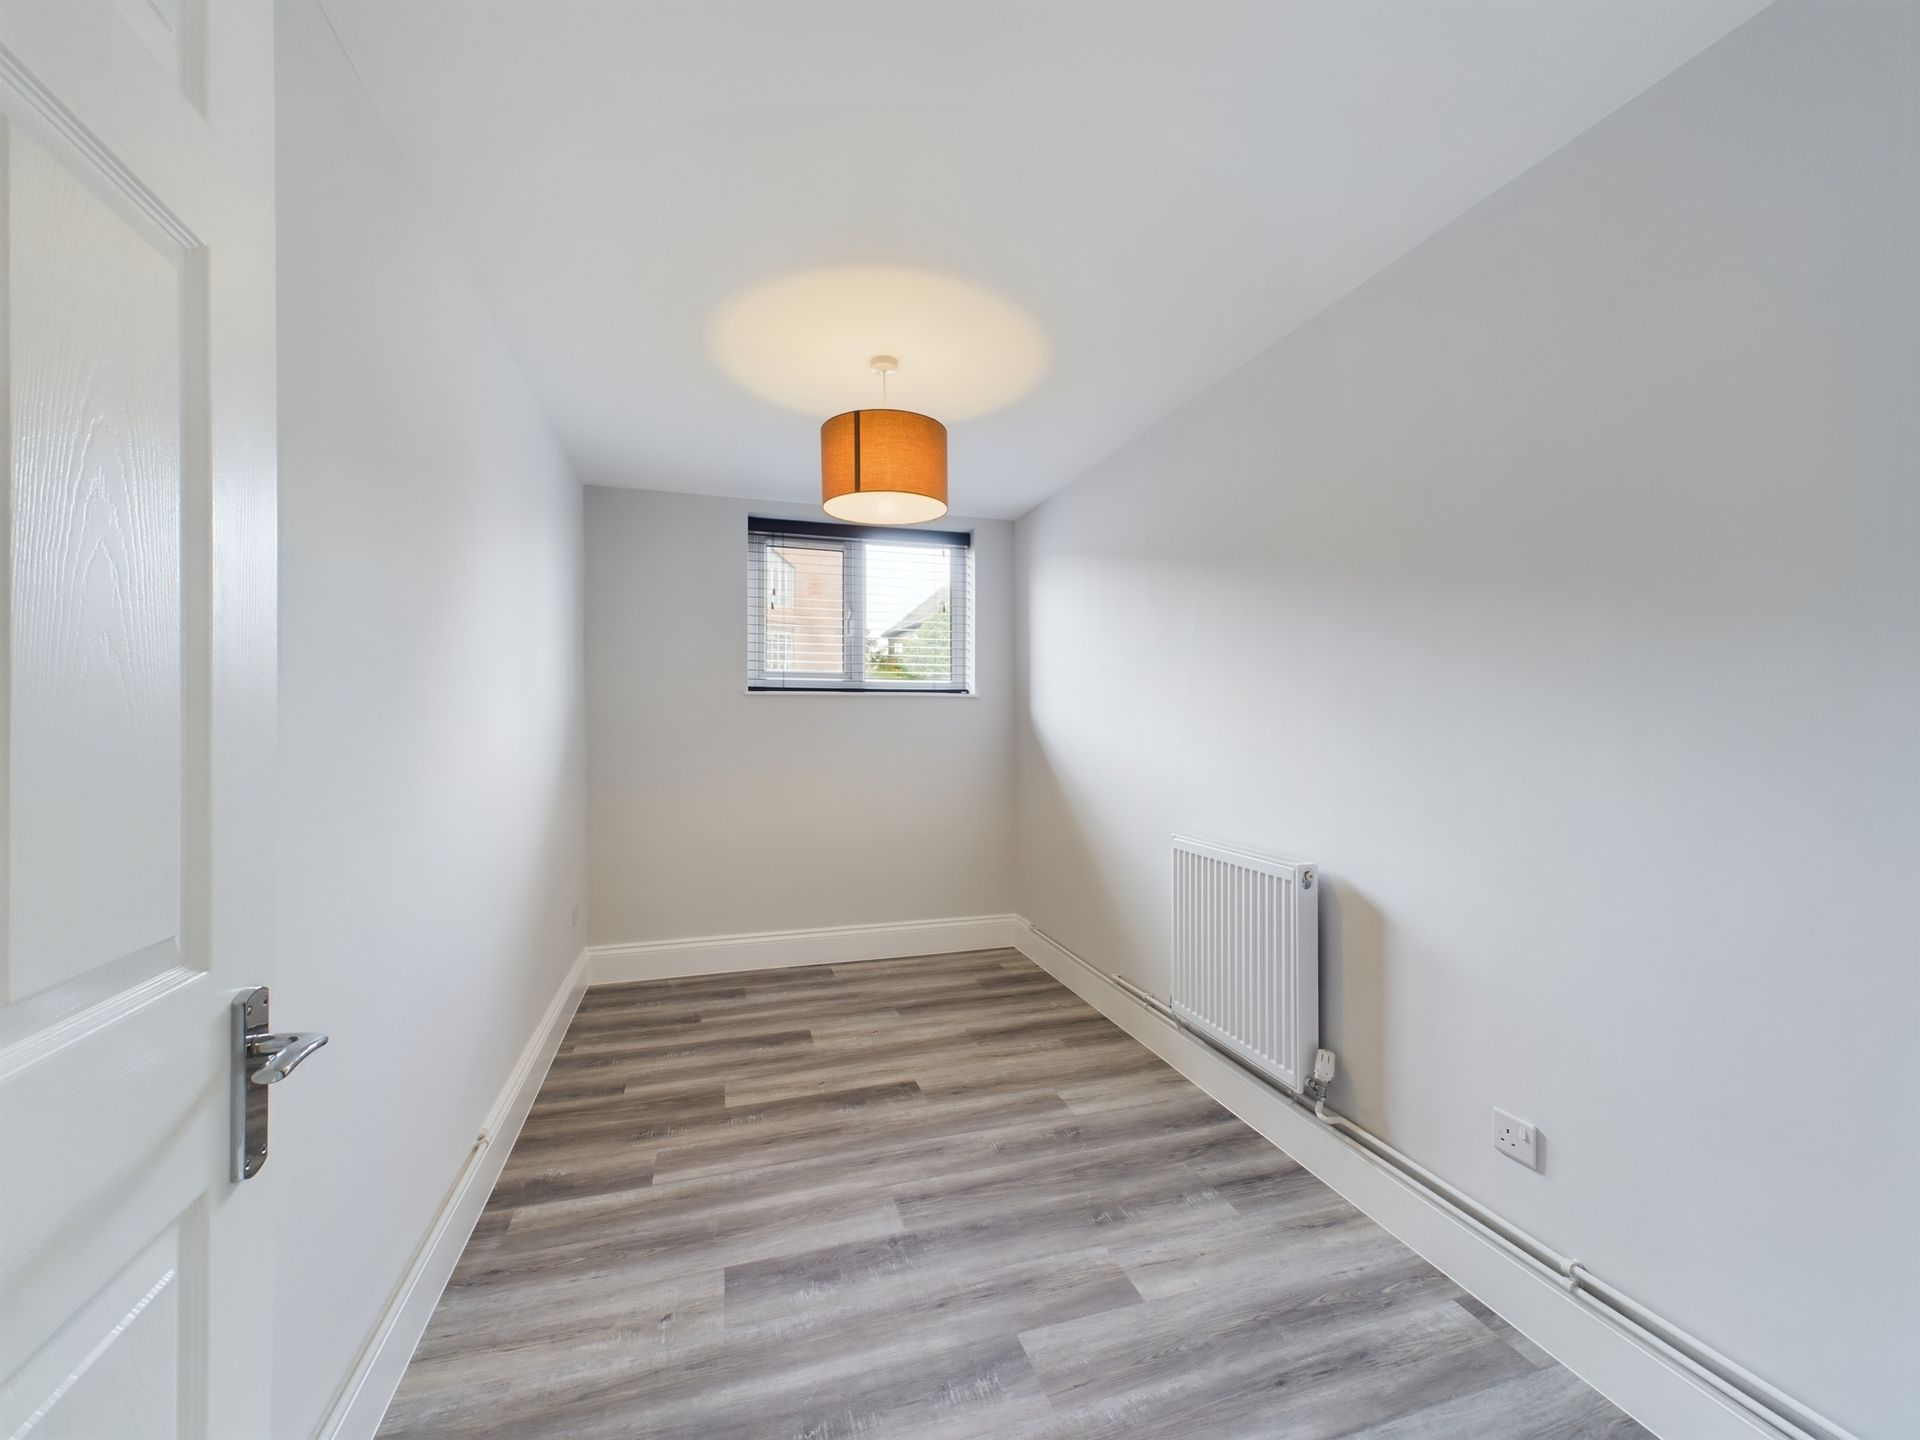 2 bed flat to rent reading refurbished